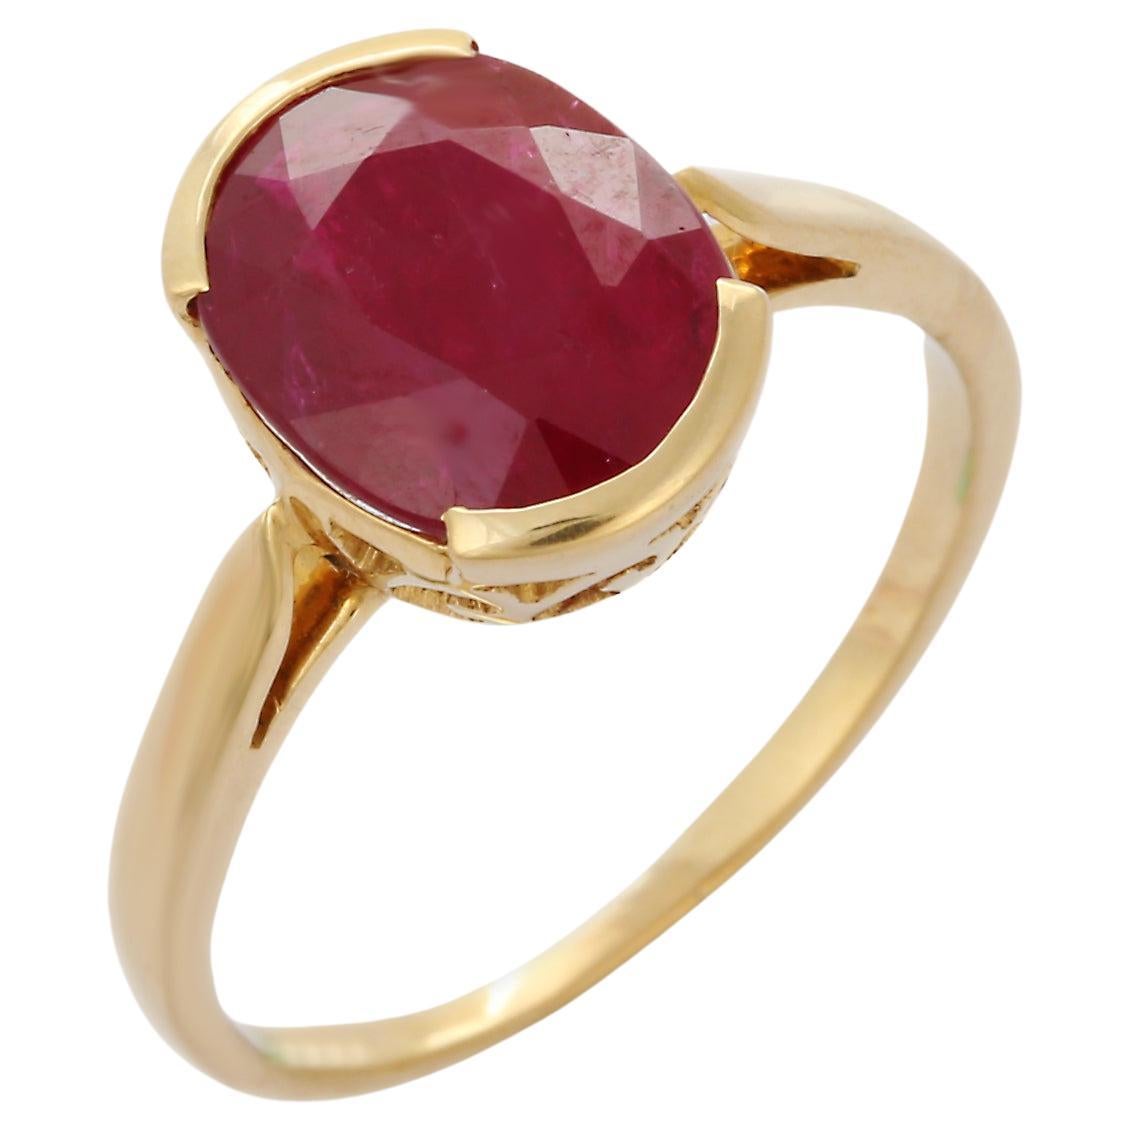 For Sale:  Contemporary Style 3.59 Carat Ruby Oval Cut Cocktail Ring in 14K Yellow Gold